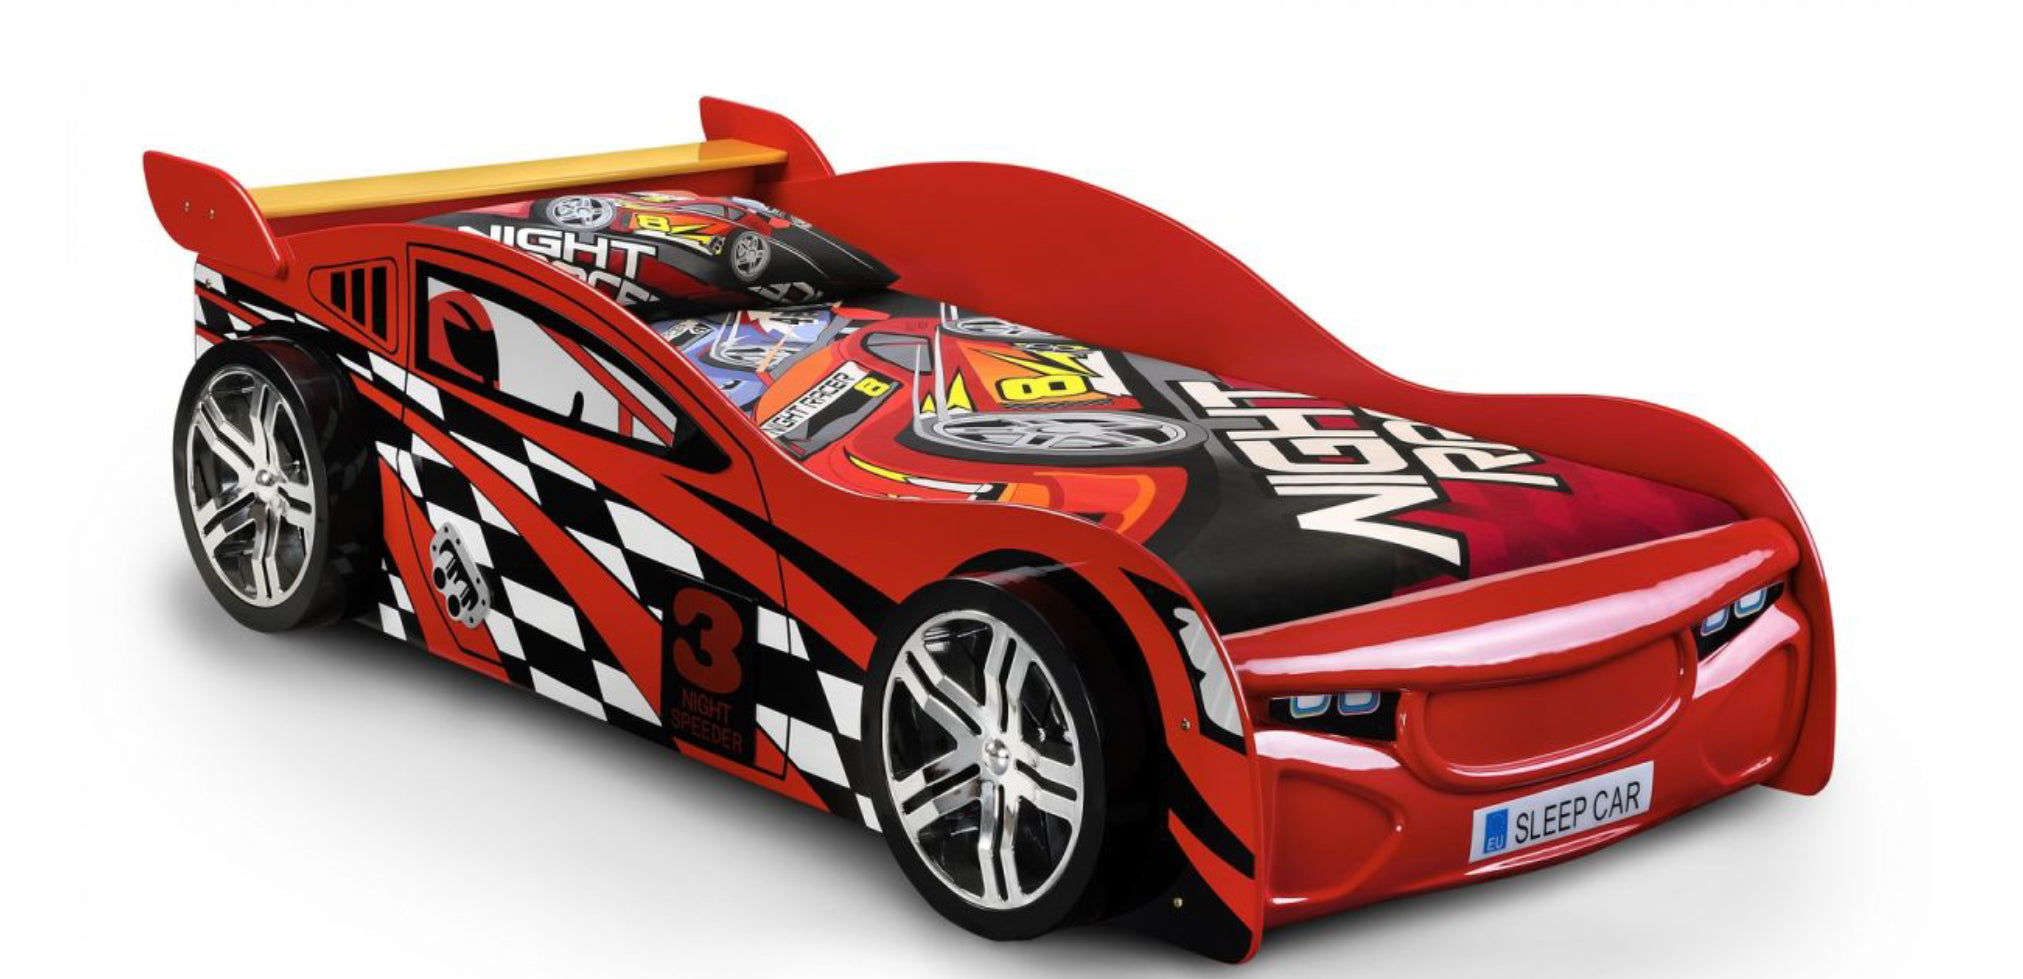 Scorpion Car Racer Bed Red